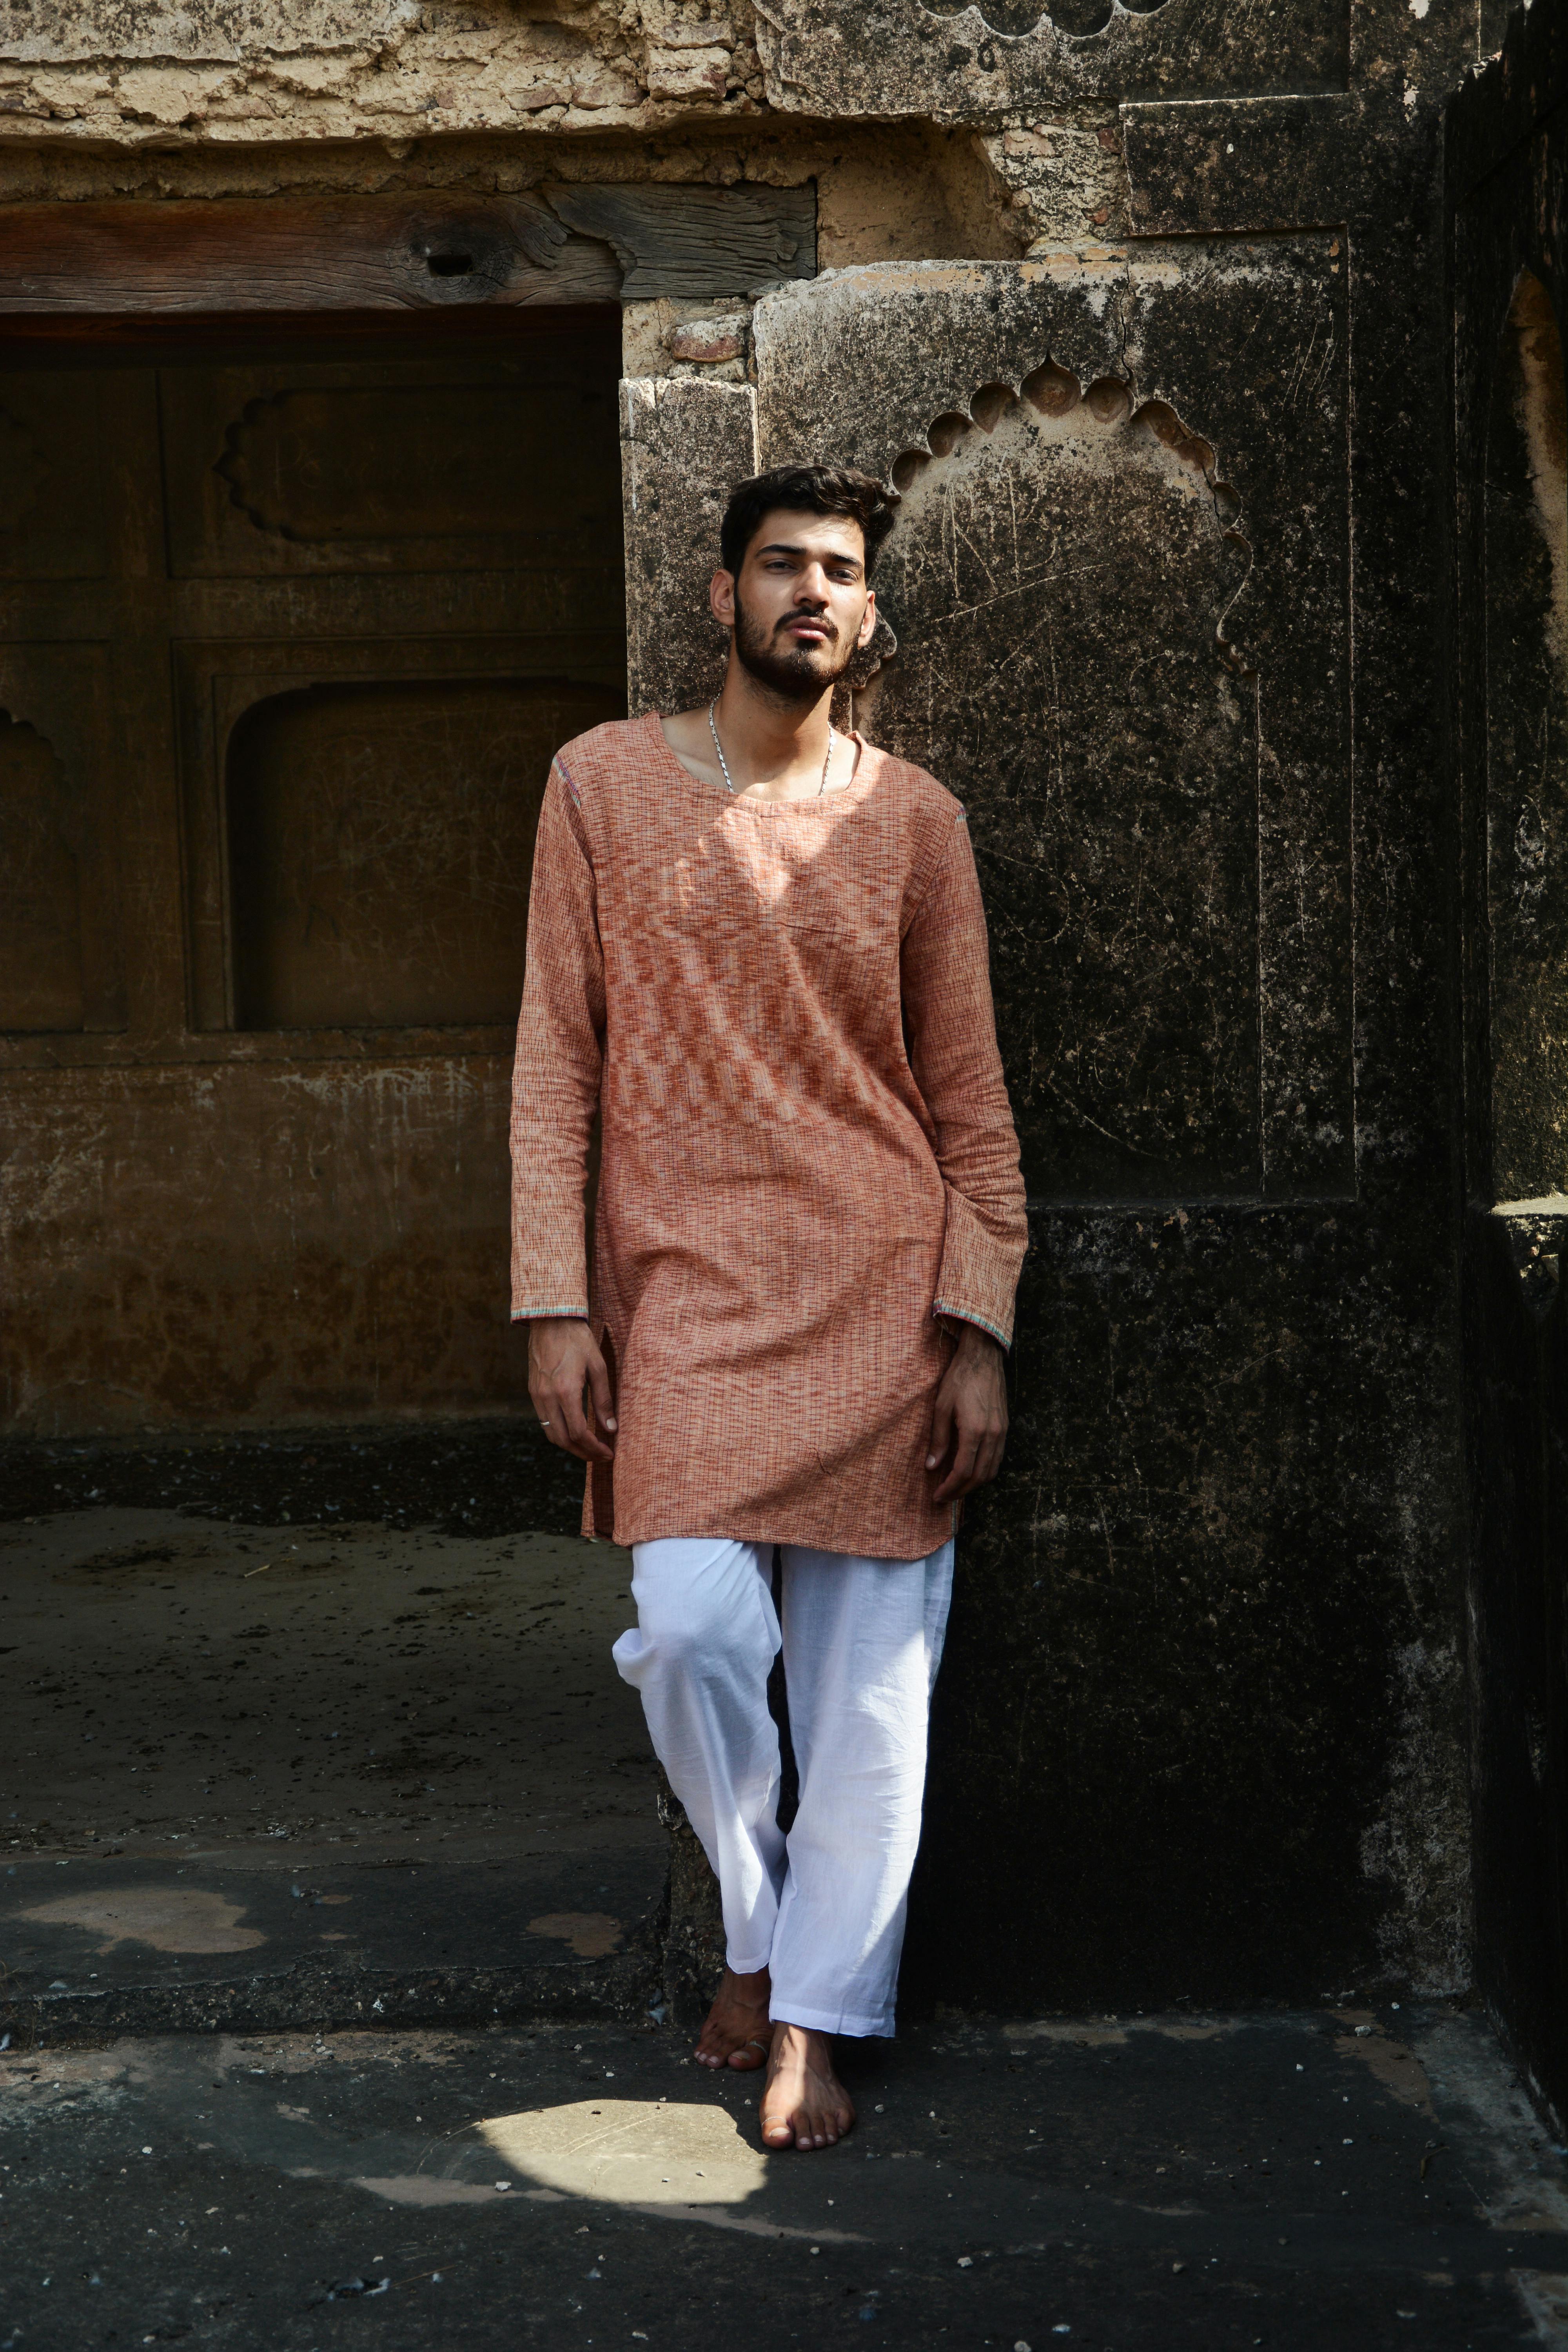 Indian Ethnic Wear Men Photos and Images & Pictures | Shutterstock